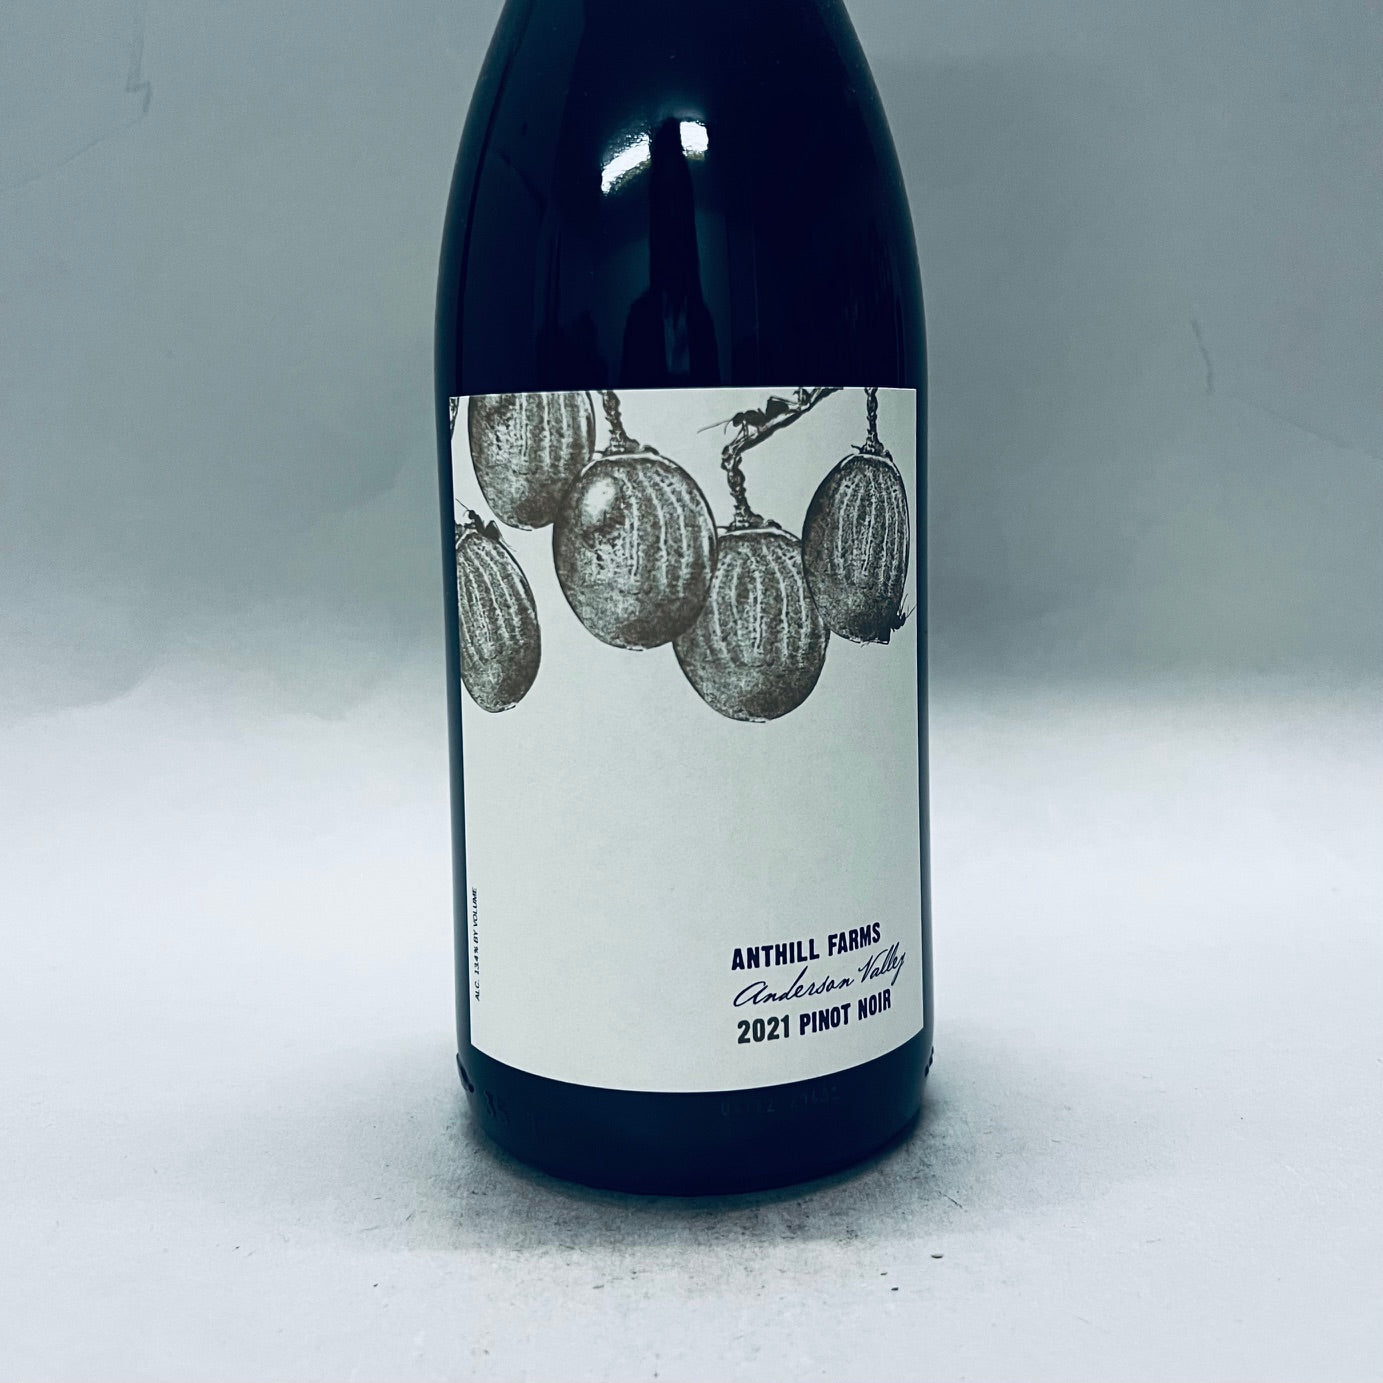 2021 Anthill Farms Anderson Valley Pinot Noir